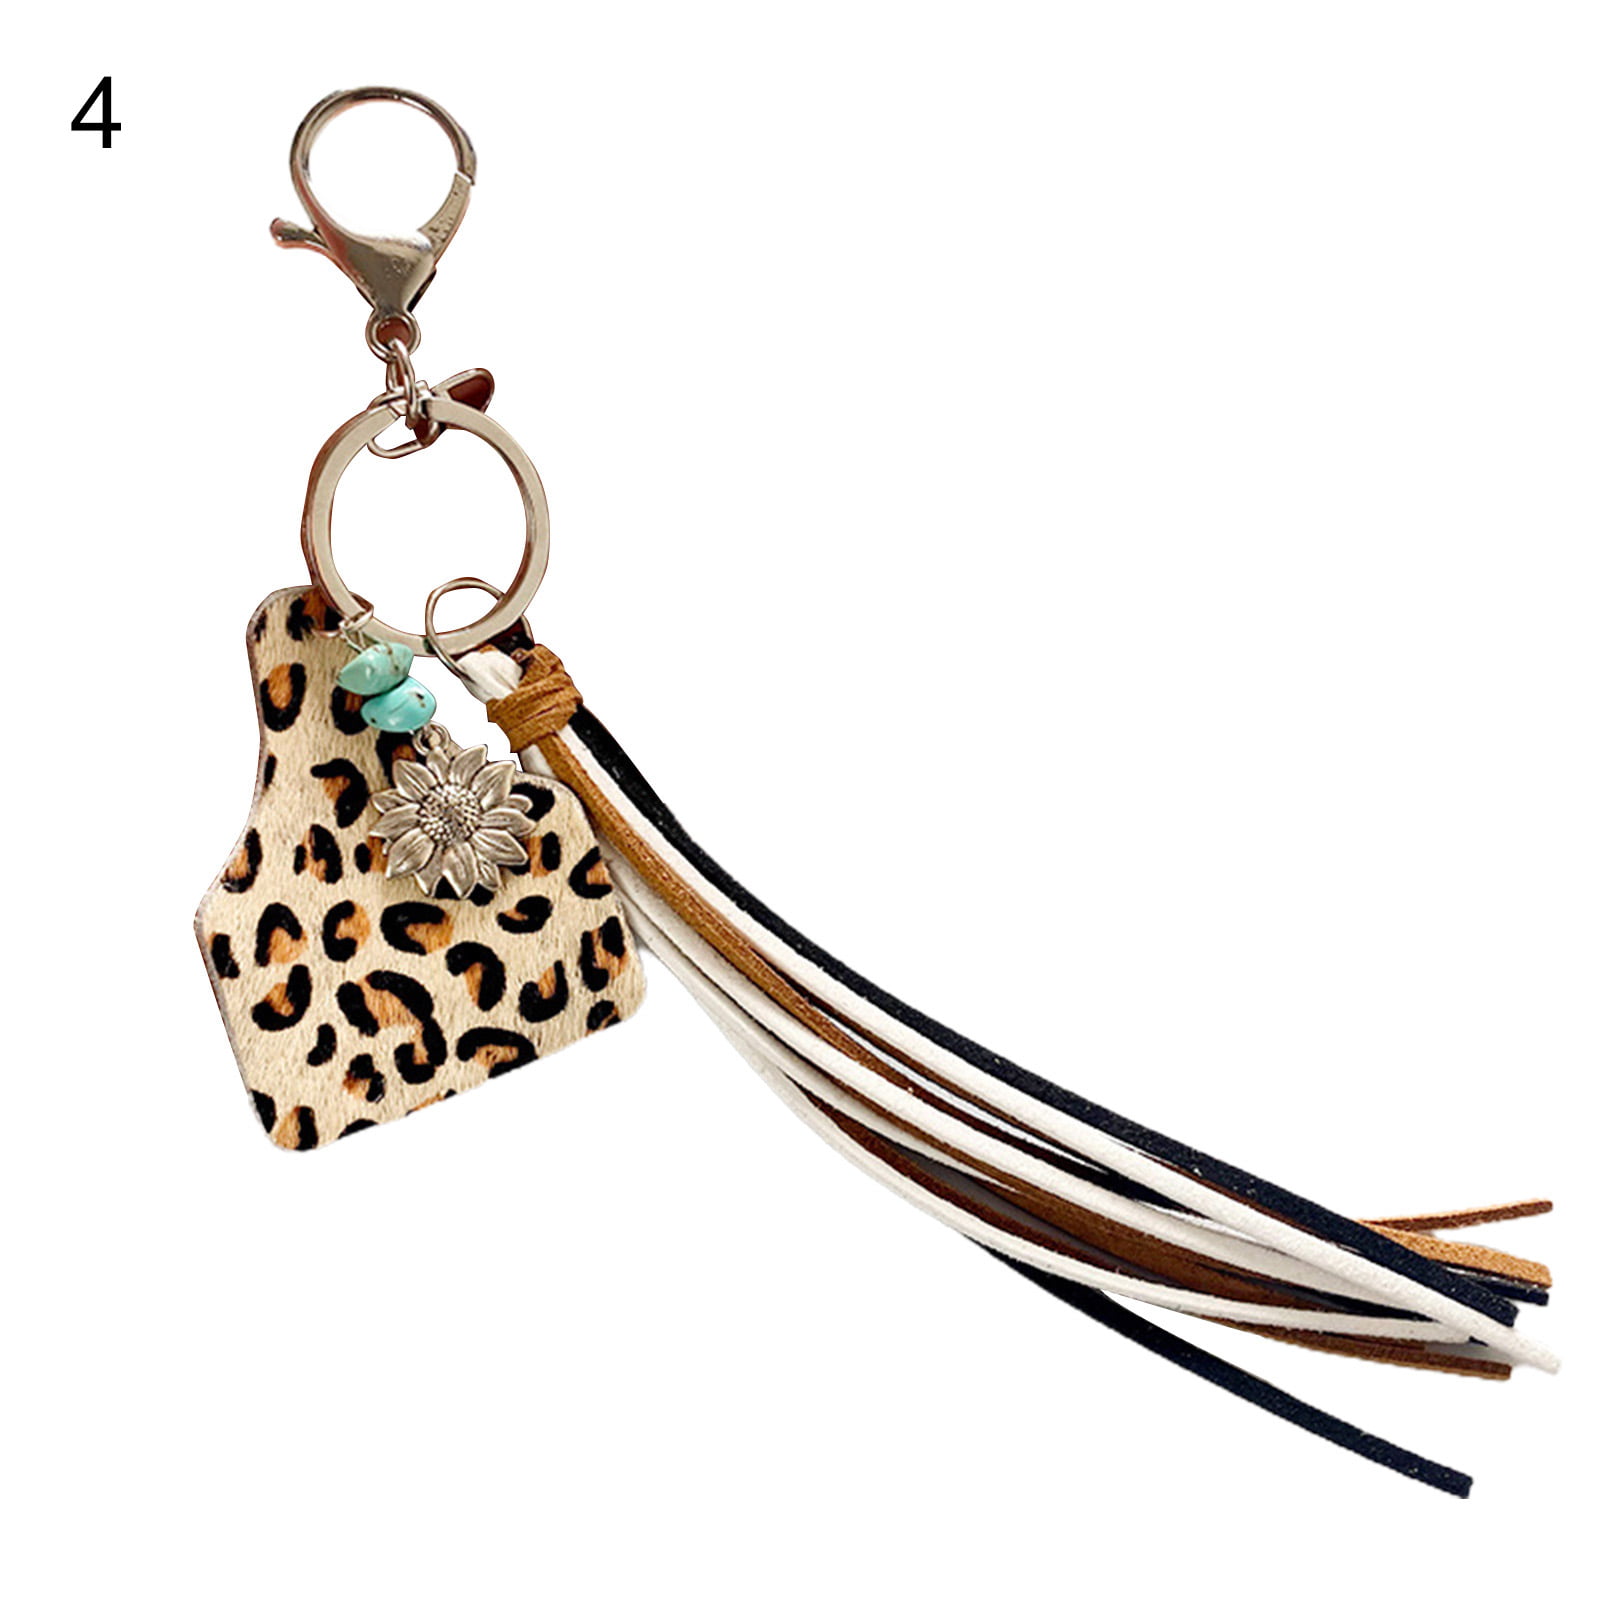 Men's New Leopard Head Leather Strap Car Key Chain Keyring Fit for All Car Model